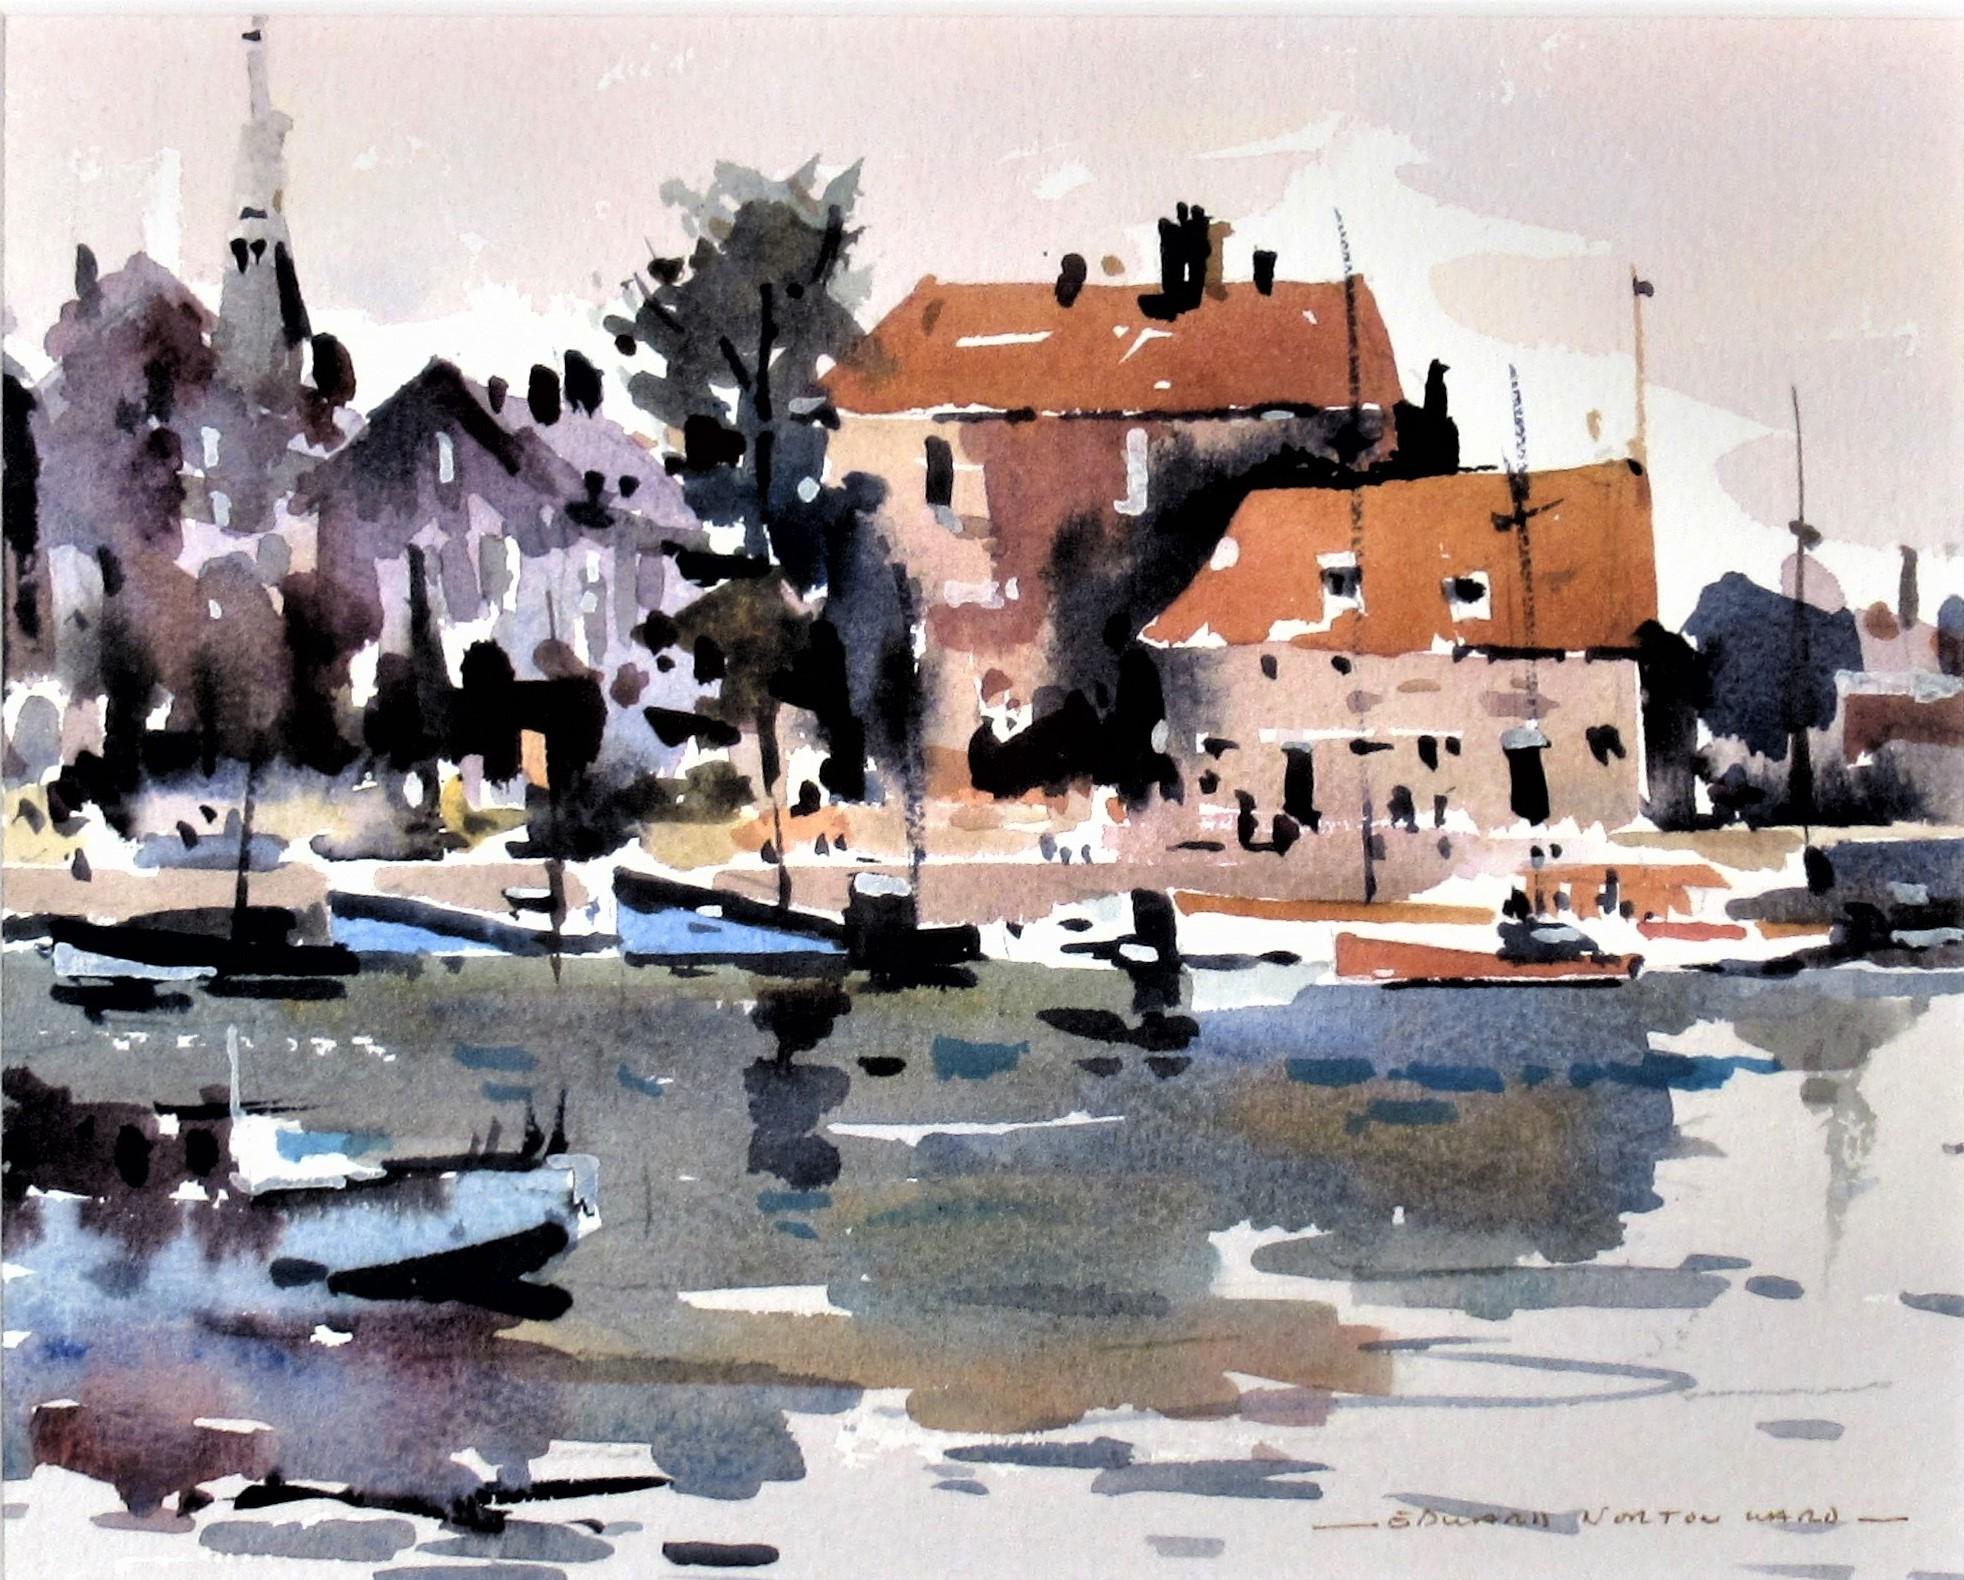 Harbor with Church - Painting by Edward Norton Ward